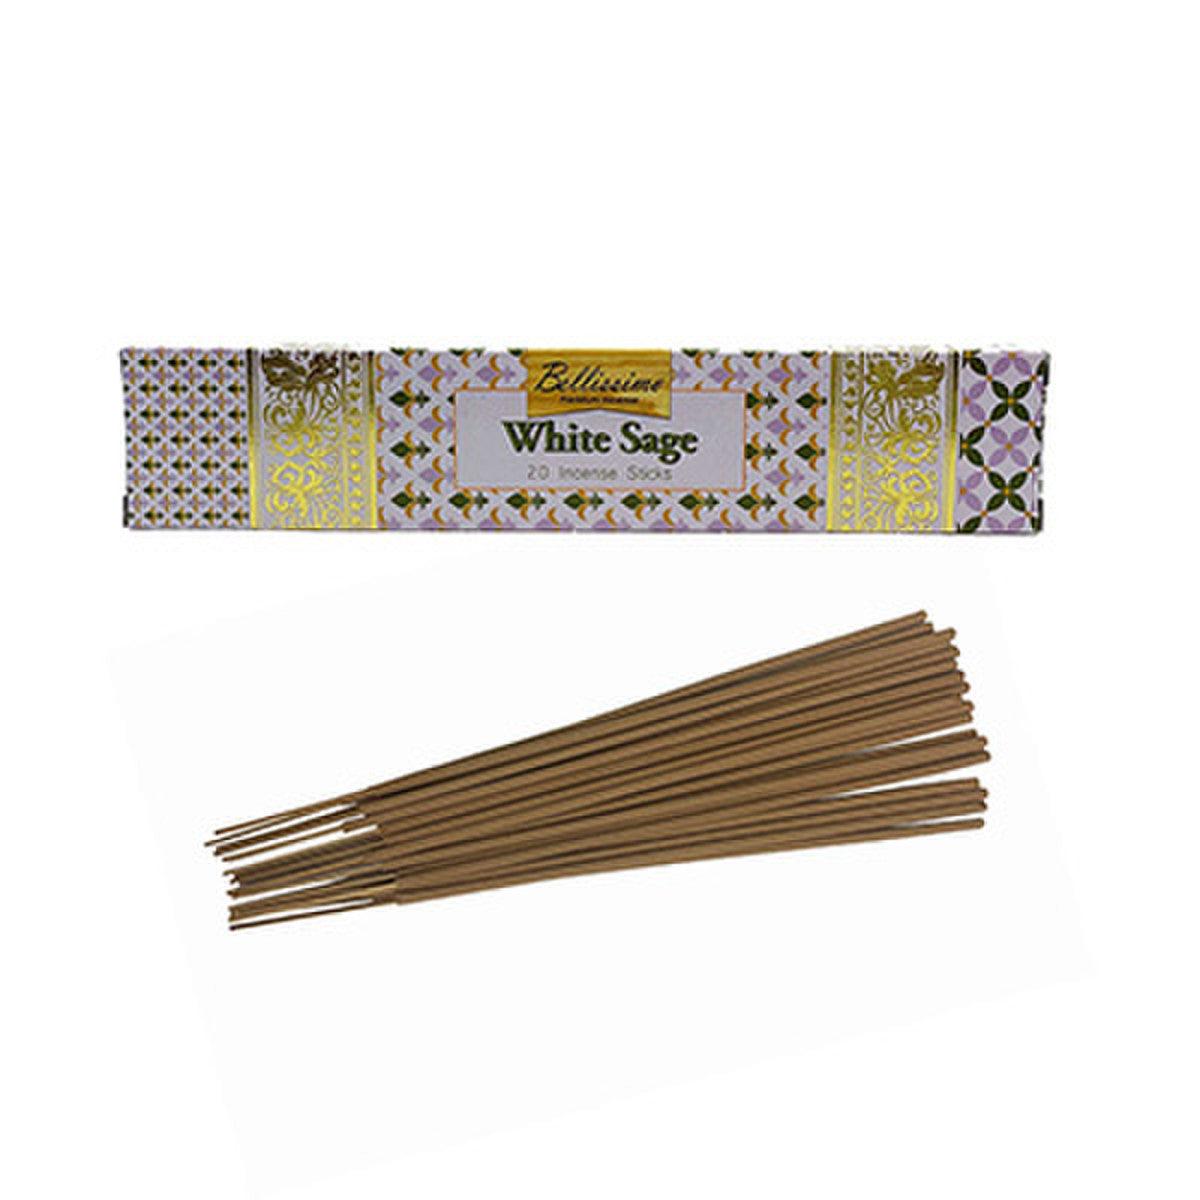 BELLISSIMO Incense White Sage - Inspire Me Naturally 